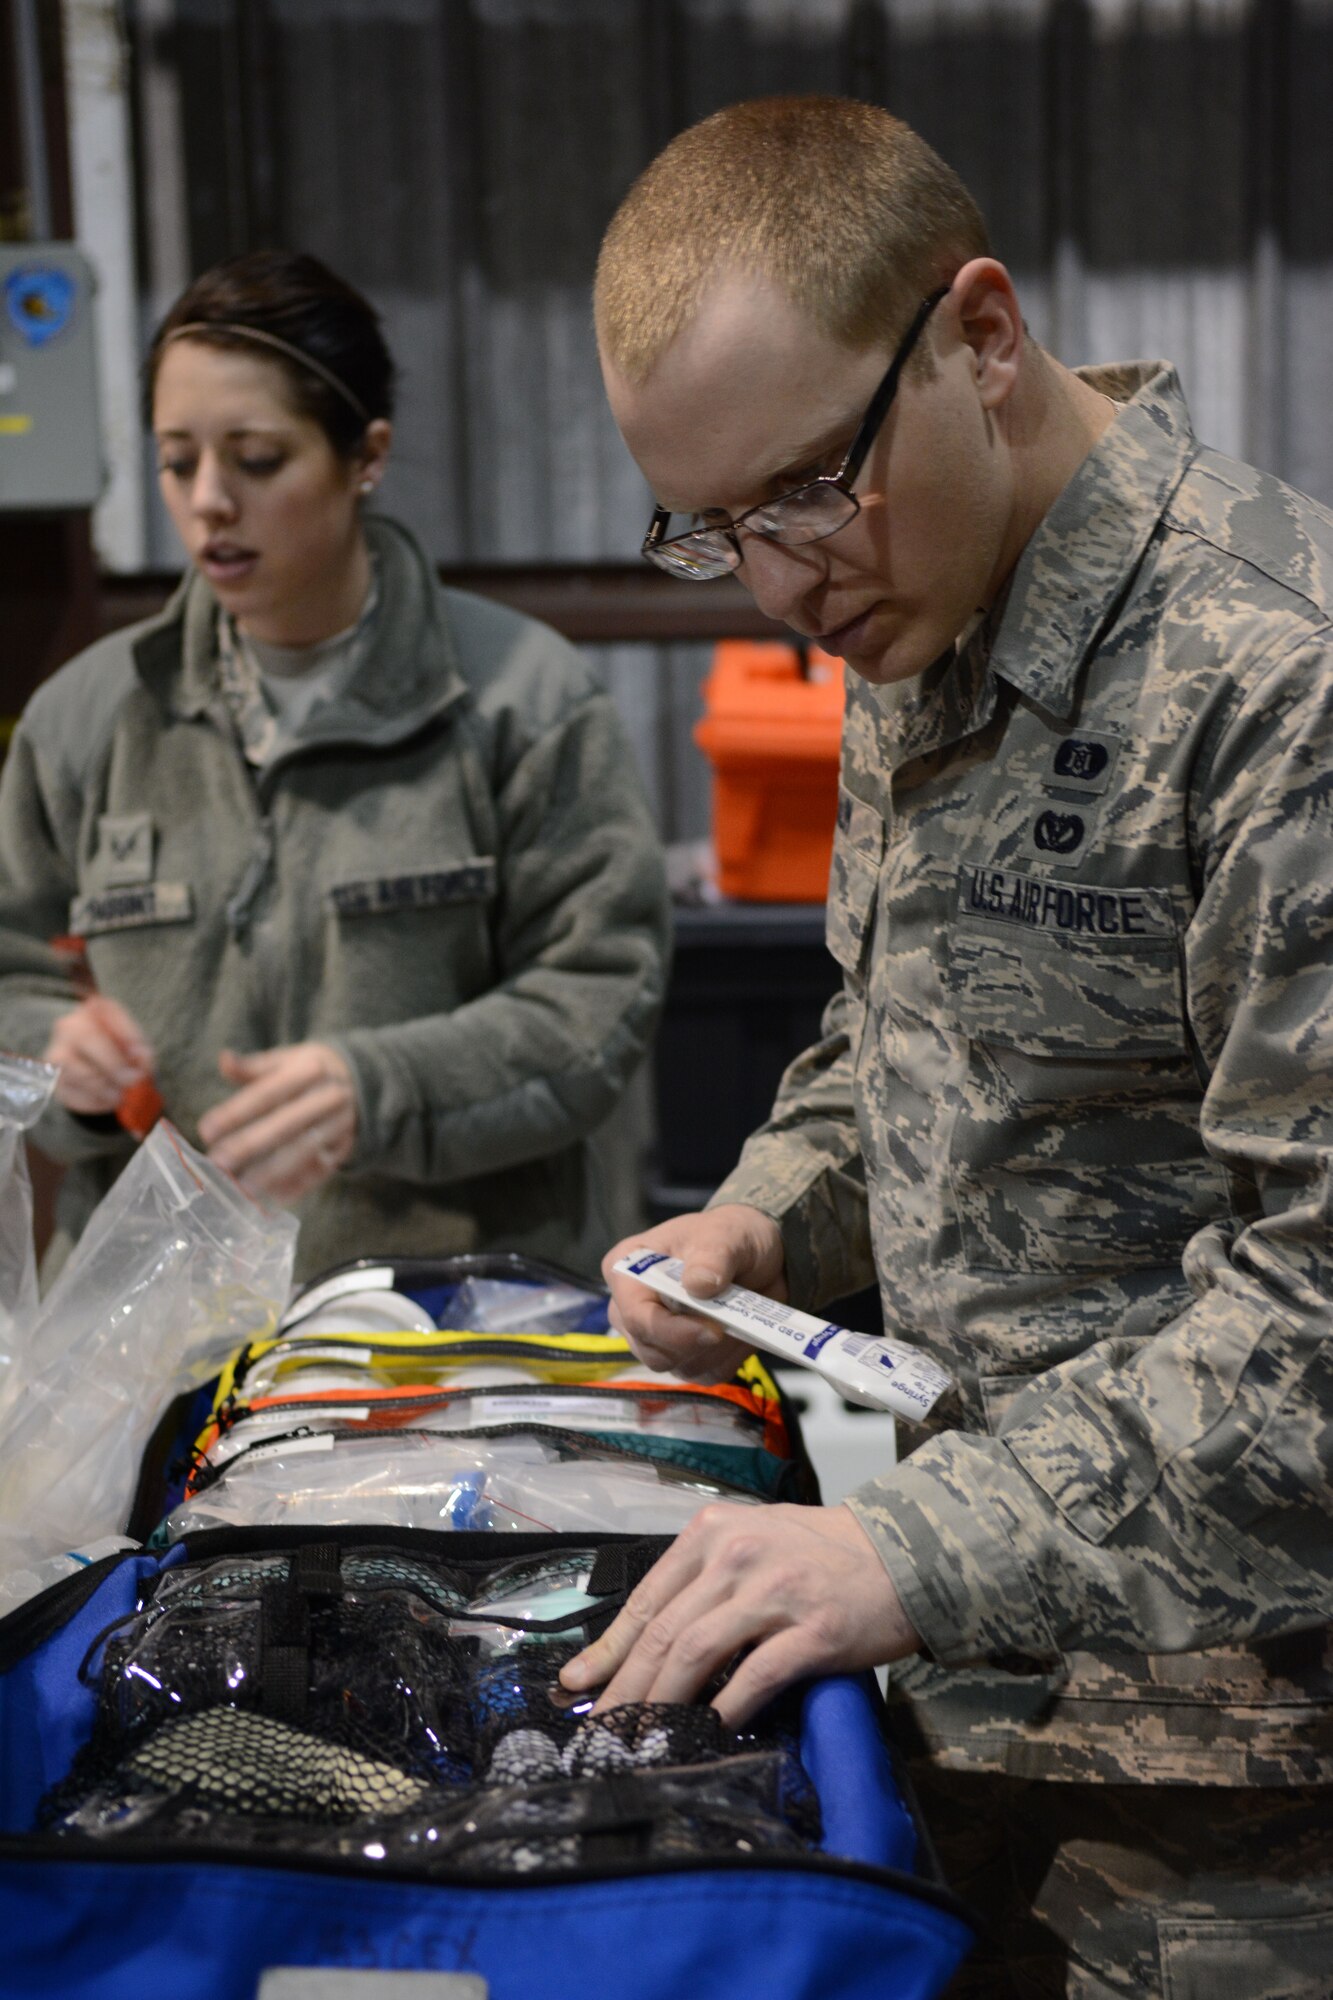 Senior Airman Jason Braun, 934th emergency management, checks equipment prior to a field exercise at Volk Field Air National Guard Base, Wis., April 4, 2014. Twenty-eight Airmen teamed up from six units for training that encompassed all hazard responses including radiation, chemical and biological situations. The training was part of emergency management’s annual training requirement. (Air National Guard photo by Senior Airman Andrea F. Liechti)